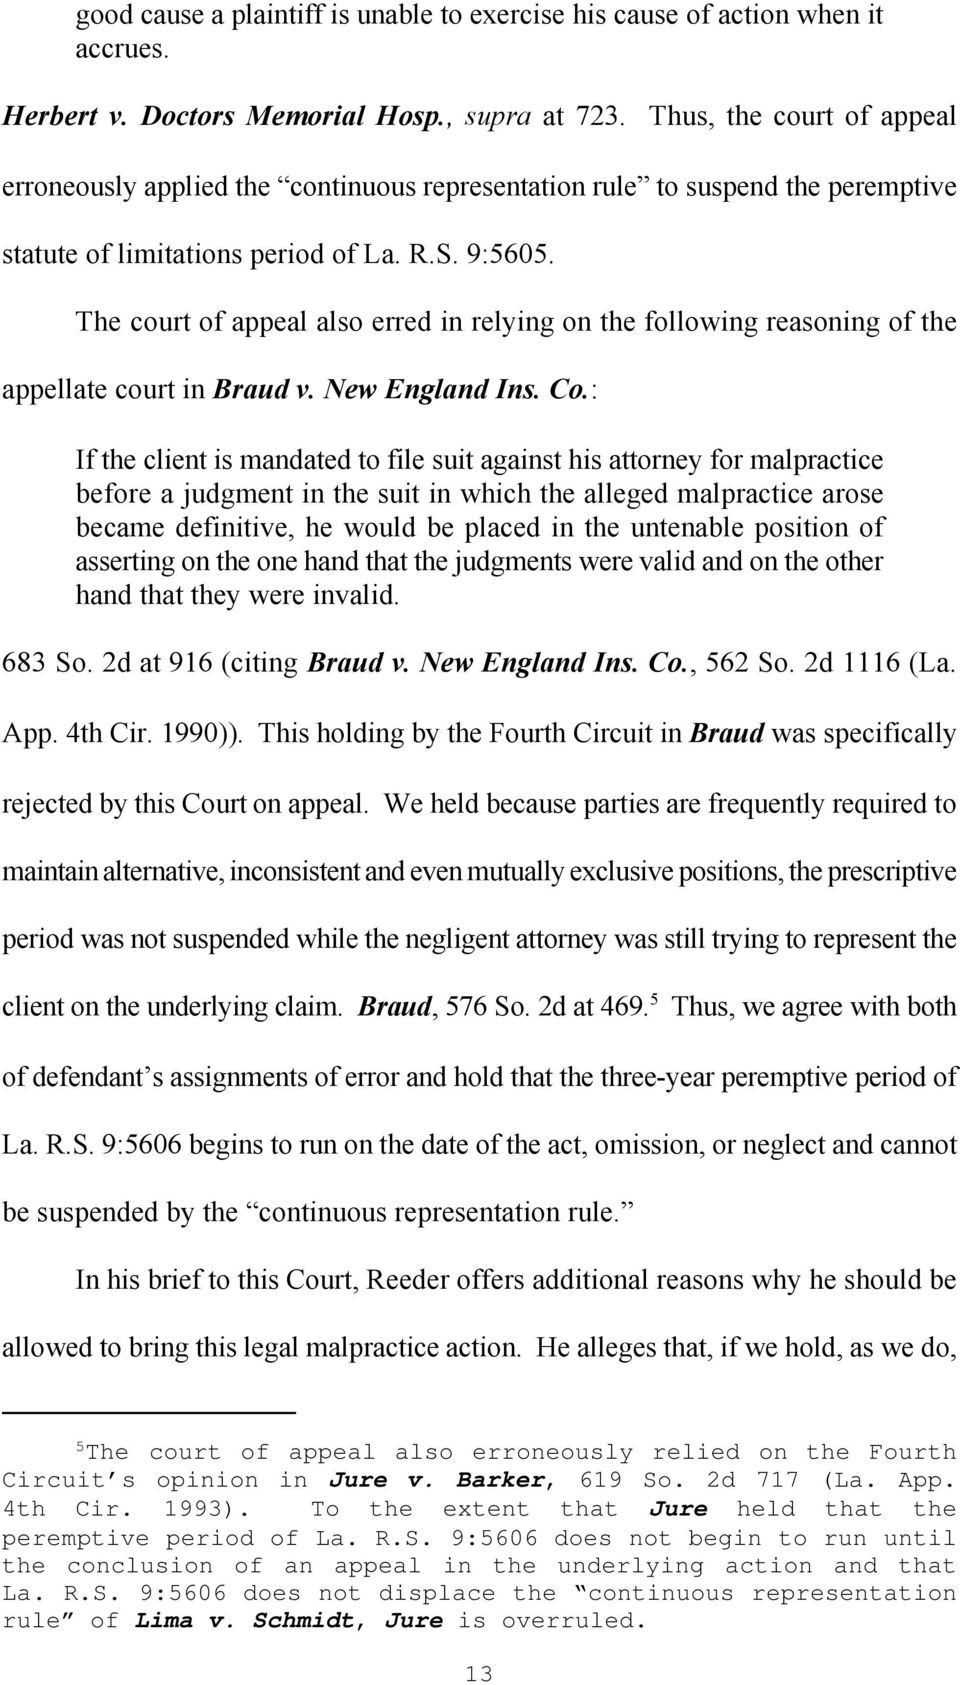 The court of appeal also erred in relying on the following reasoning of the appellate court in Braud v. New England Ins. Co.